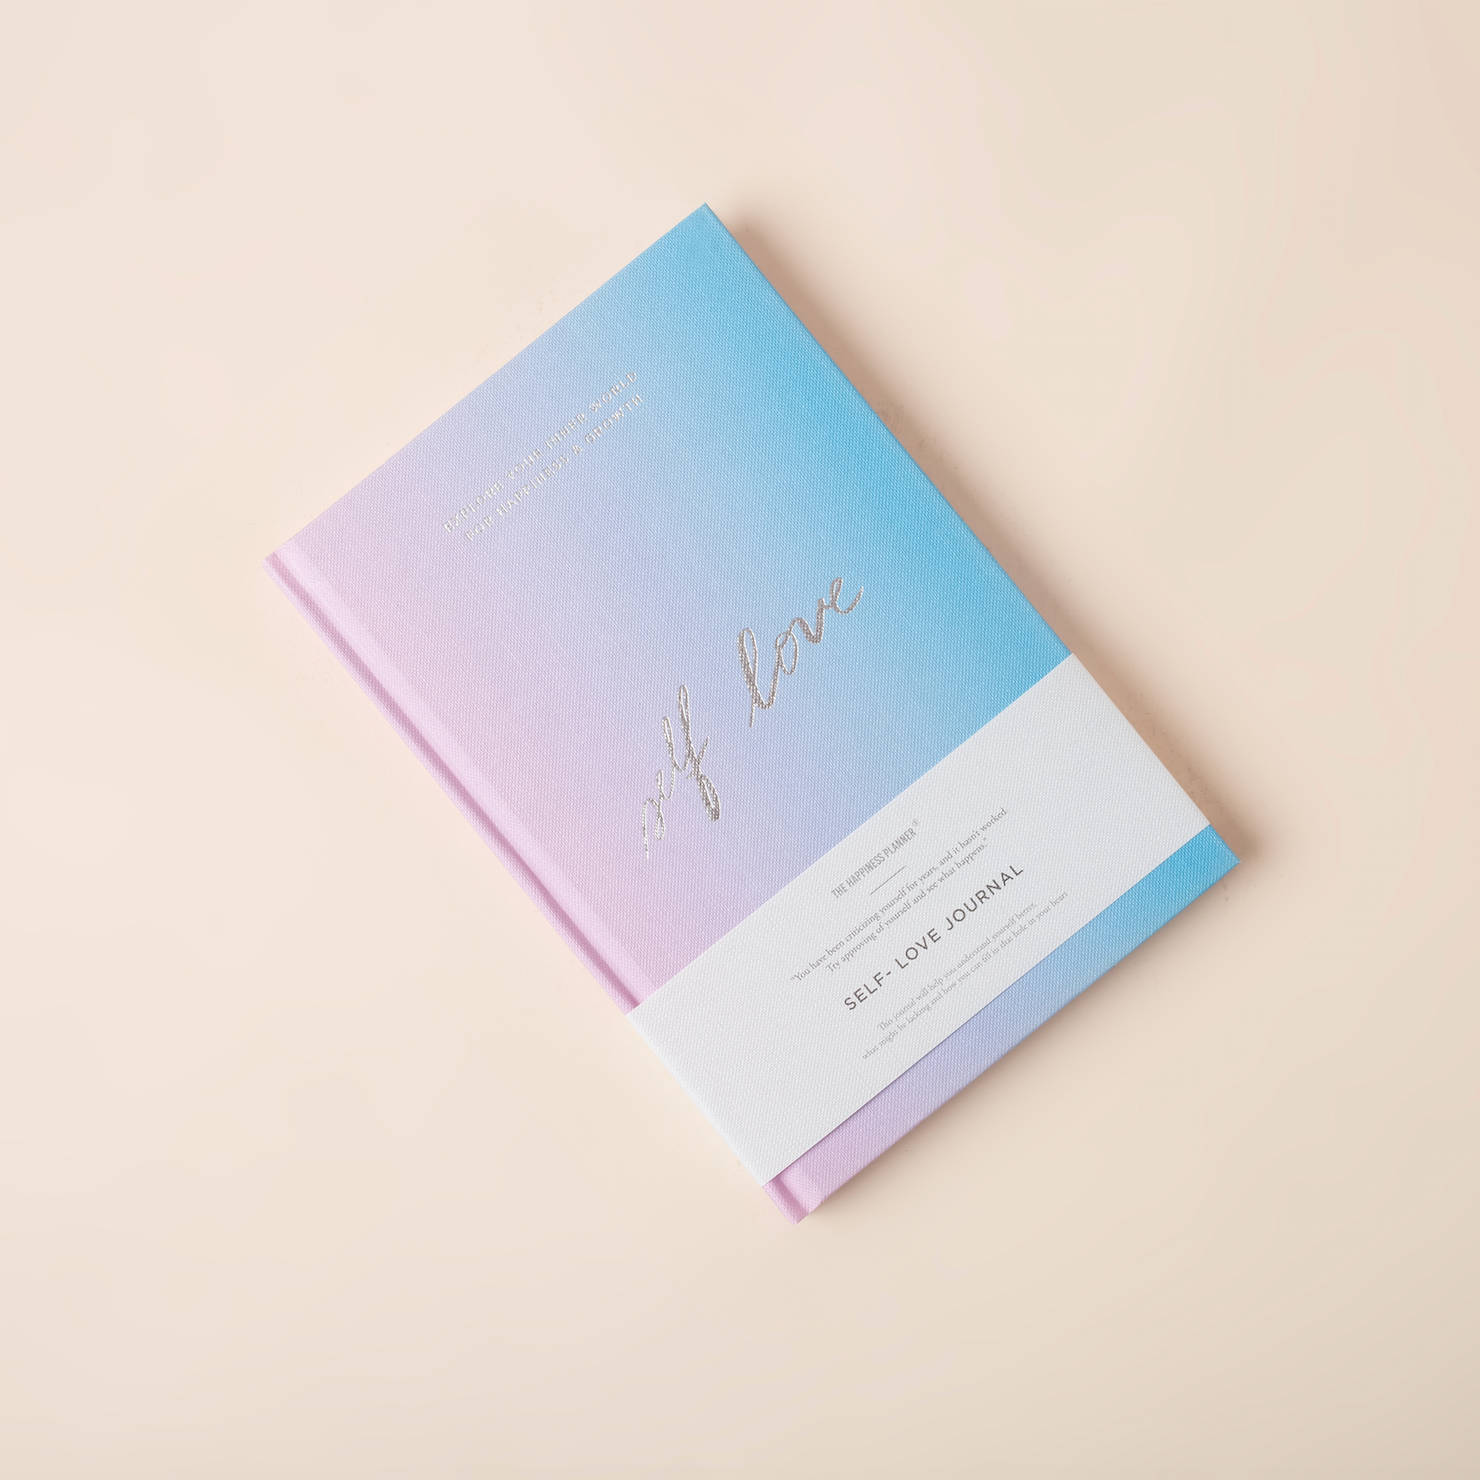 Explore Your Inner World | Self-Love Journal - The Happiness Planner®